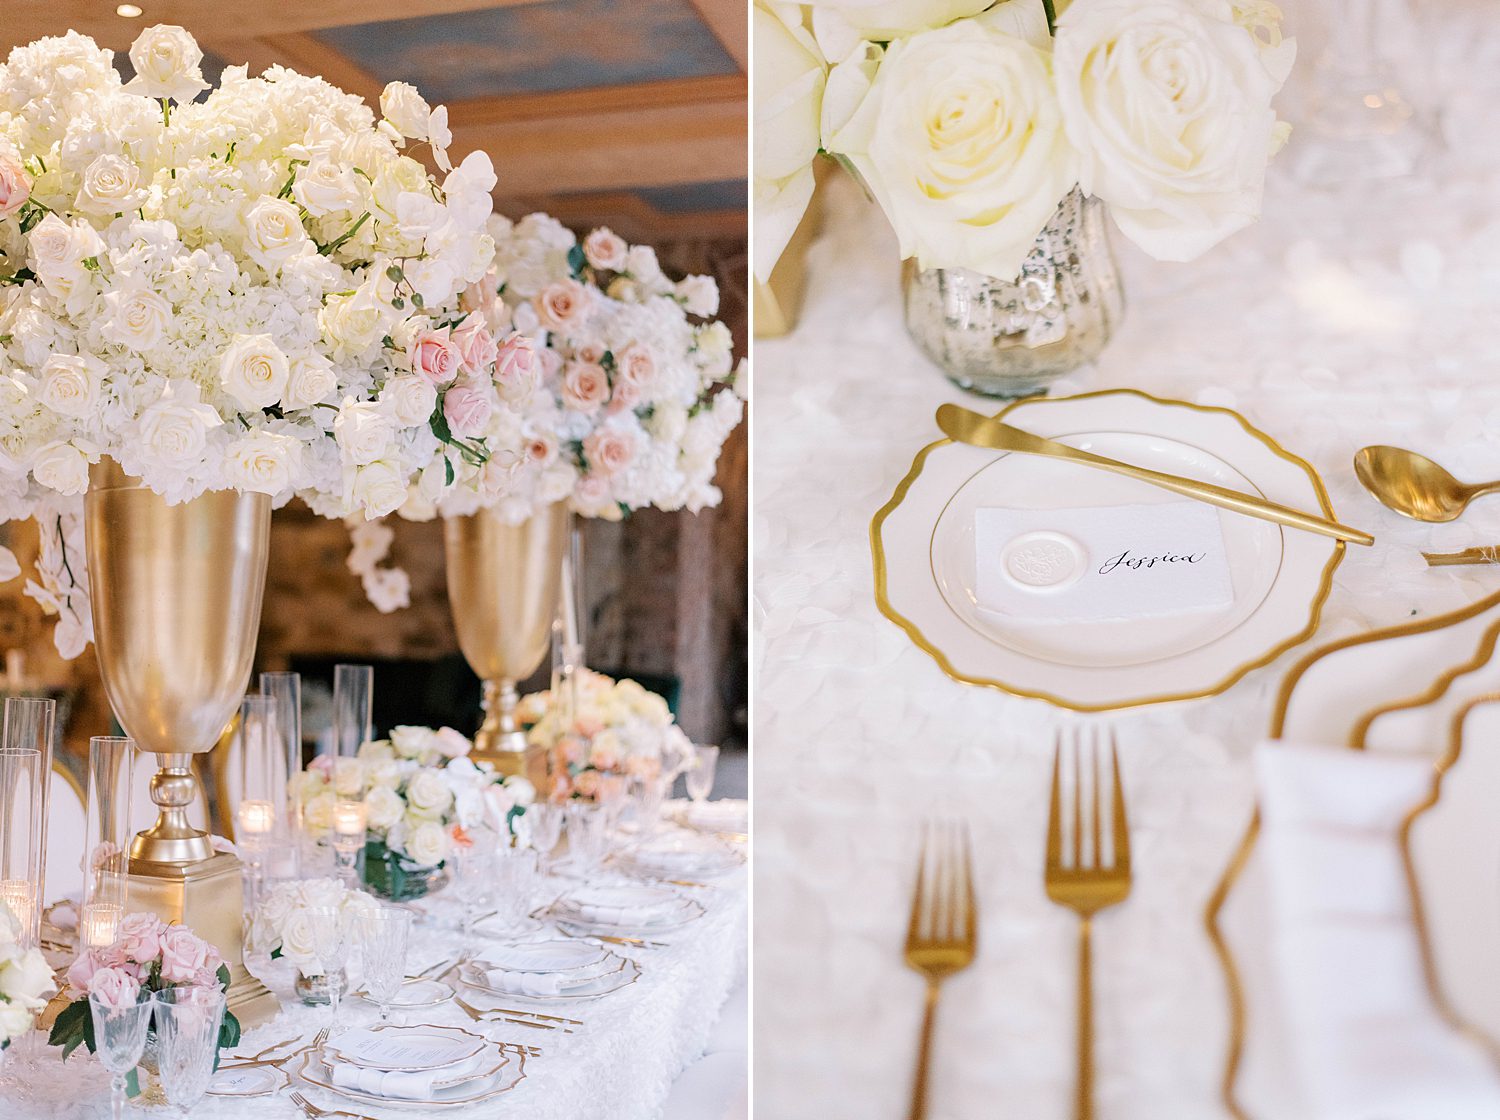 place settings with gold-rimmed plates for Florida wedding day